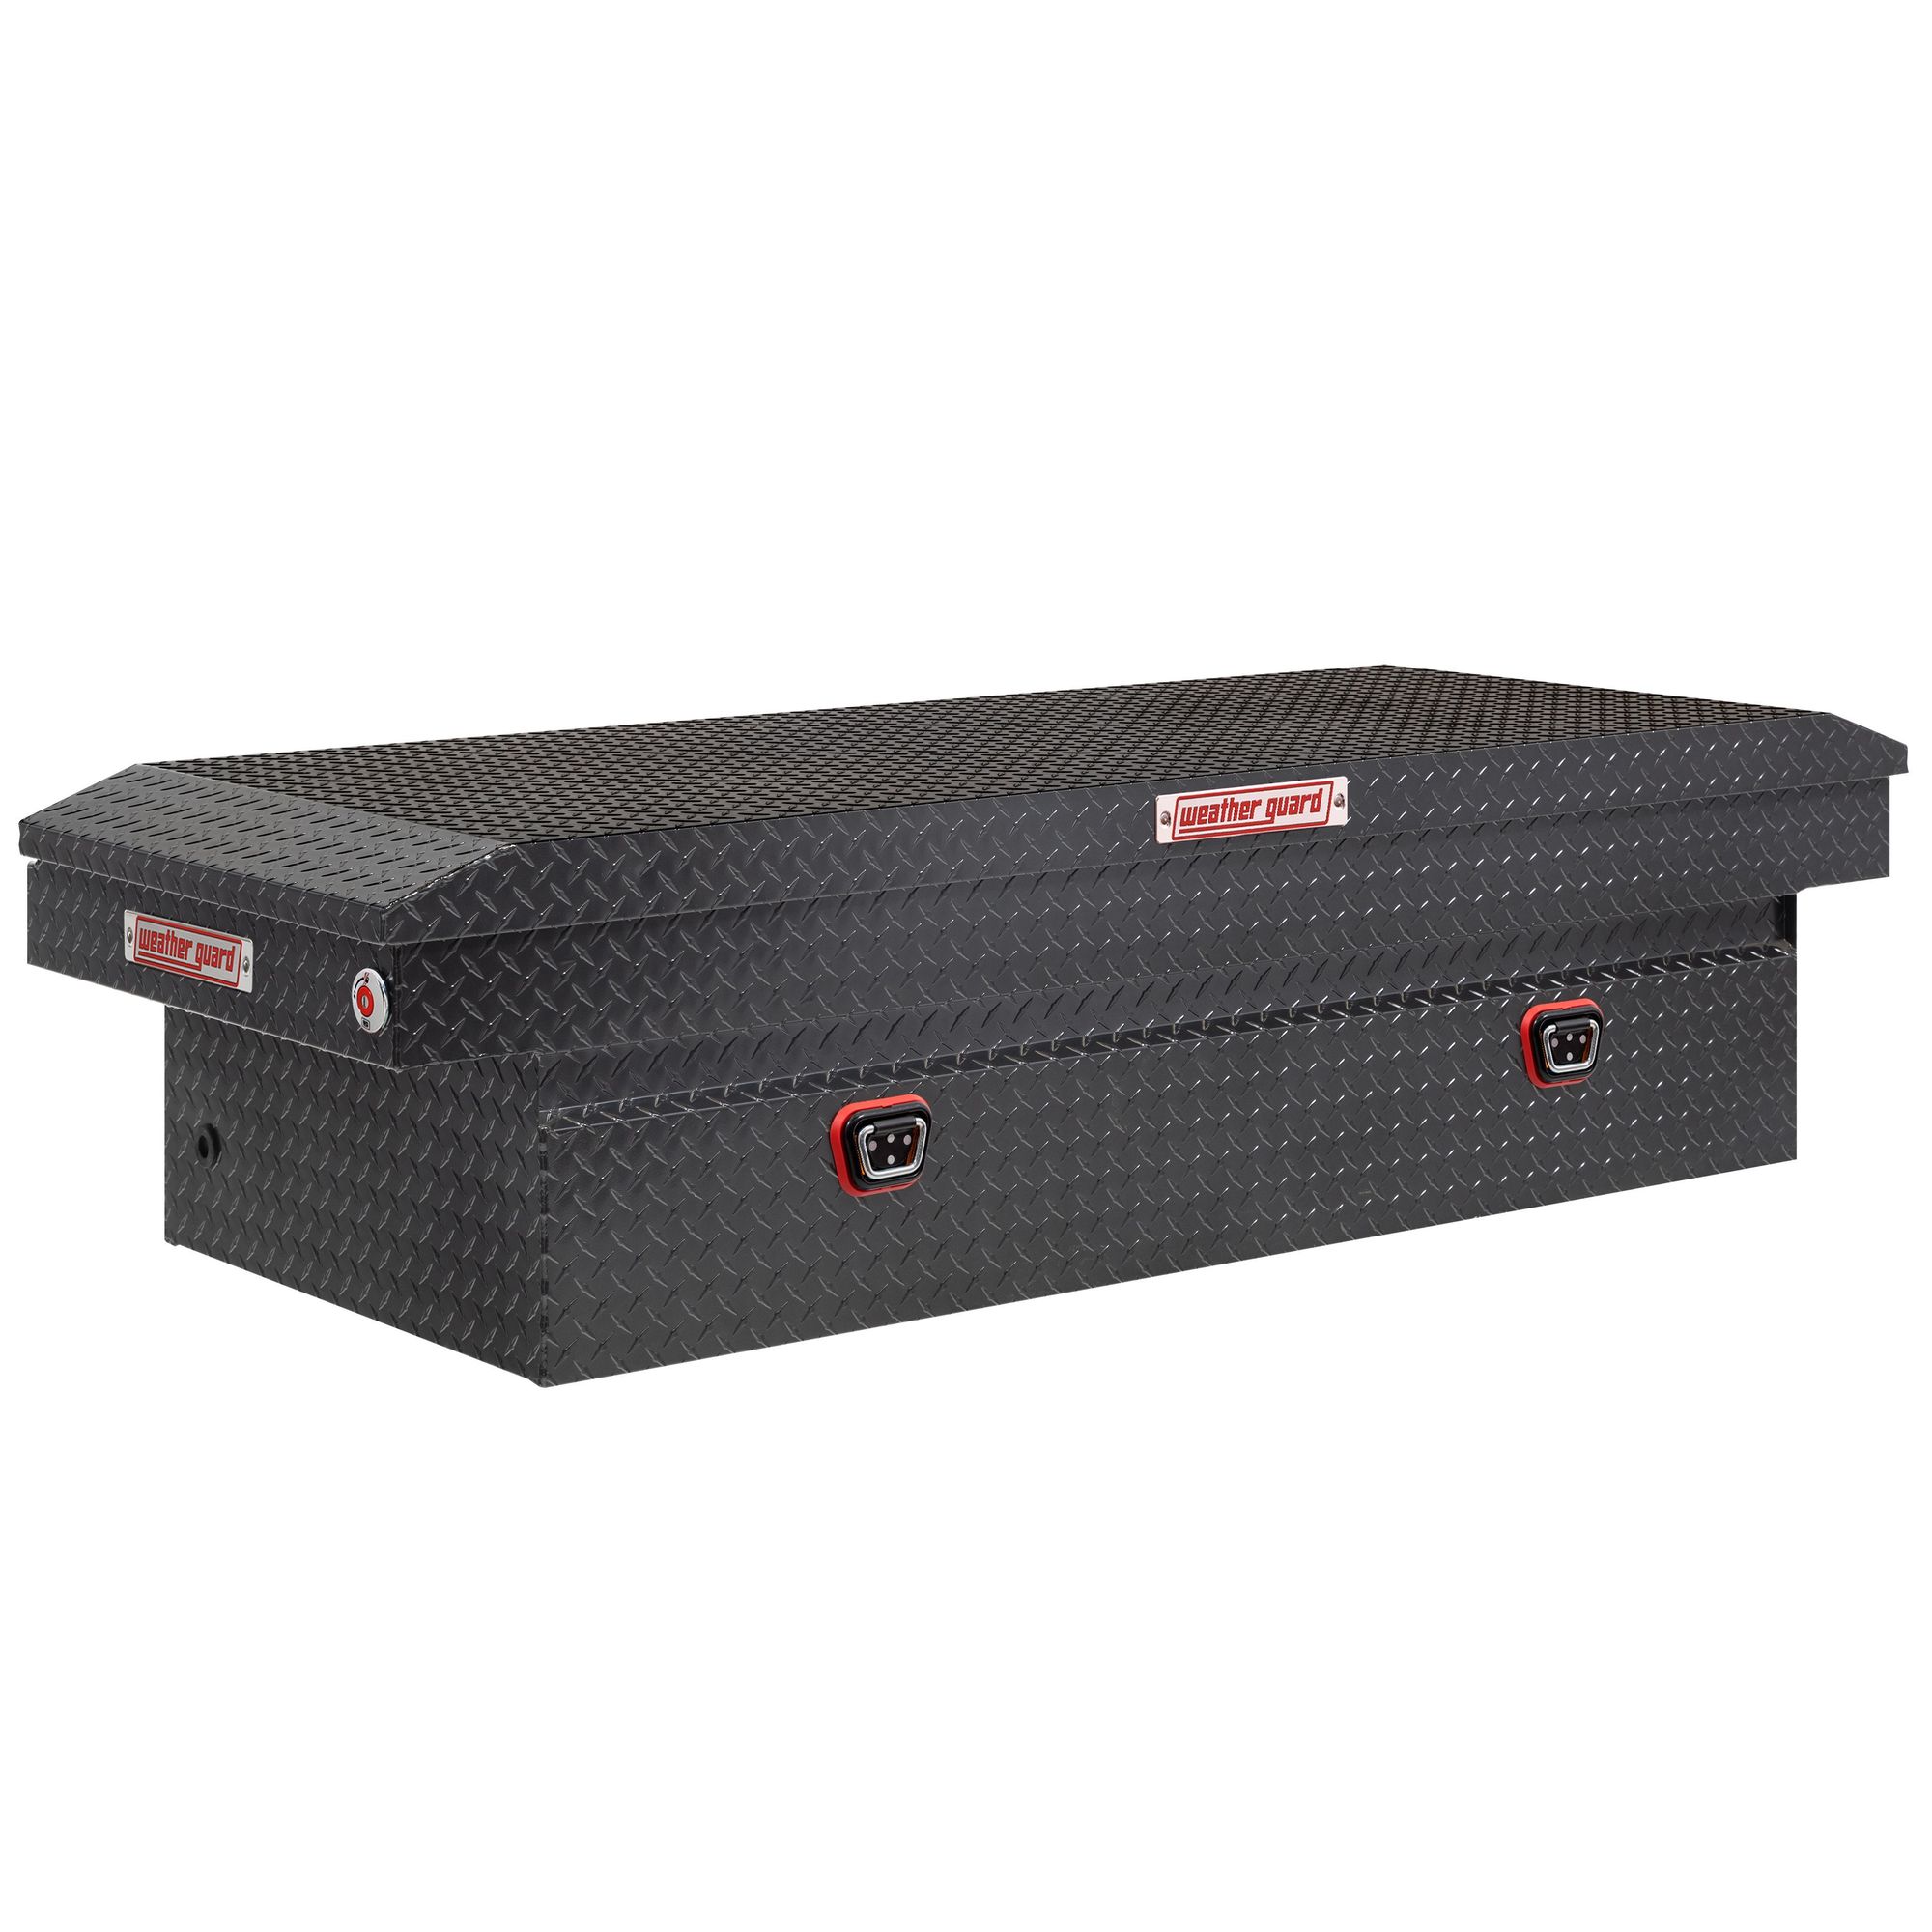 71Inch L Saddle Box, Full Extra Wide, Width 72 in, Material Aluminum, Color Finish Gray, Model - Weather Guard 117-6-04